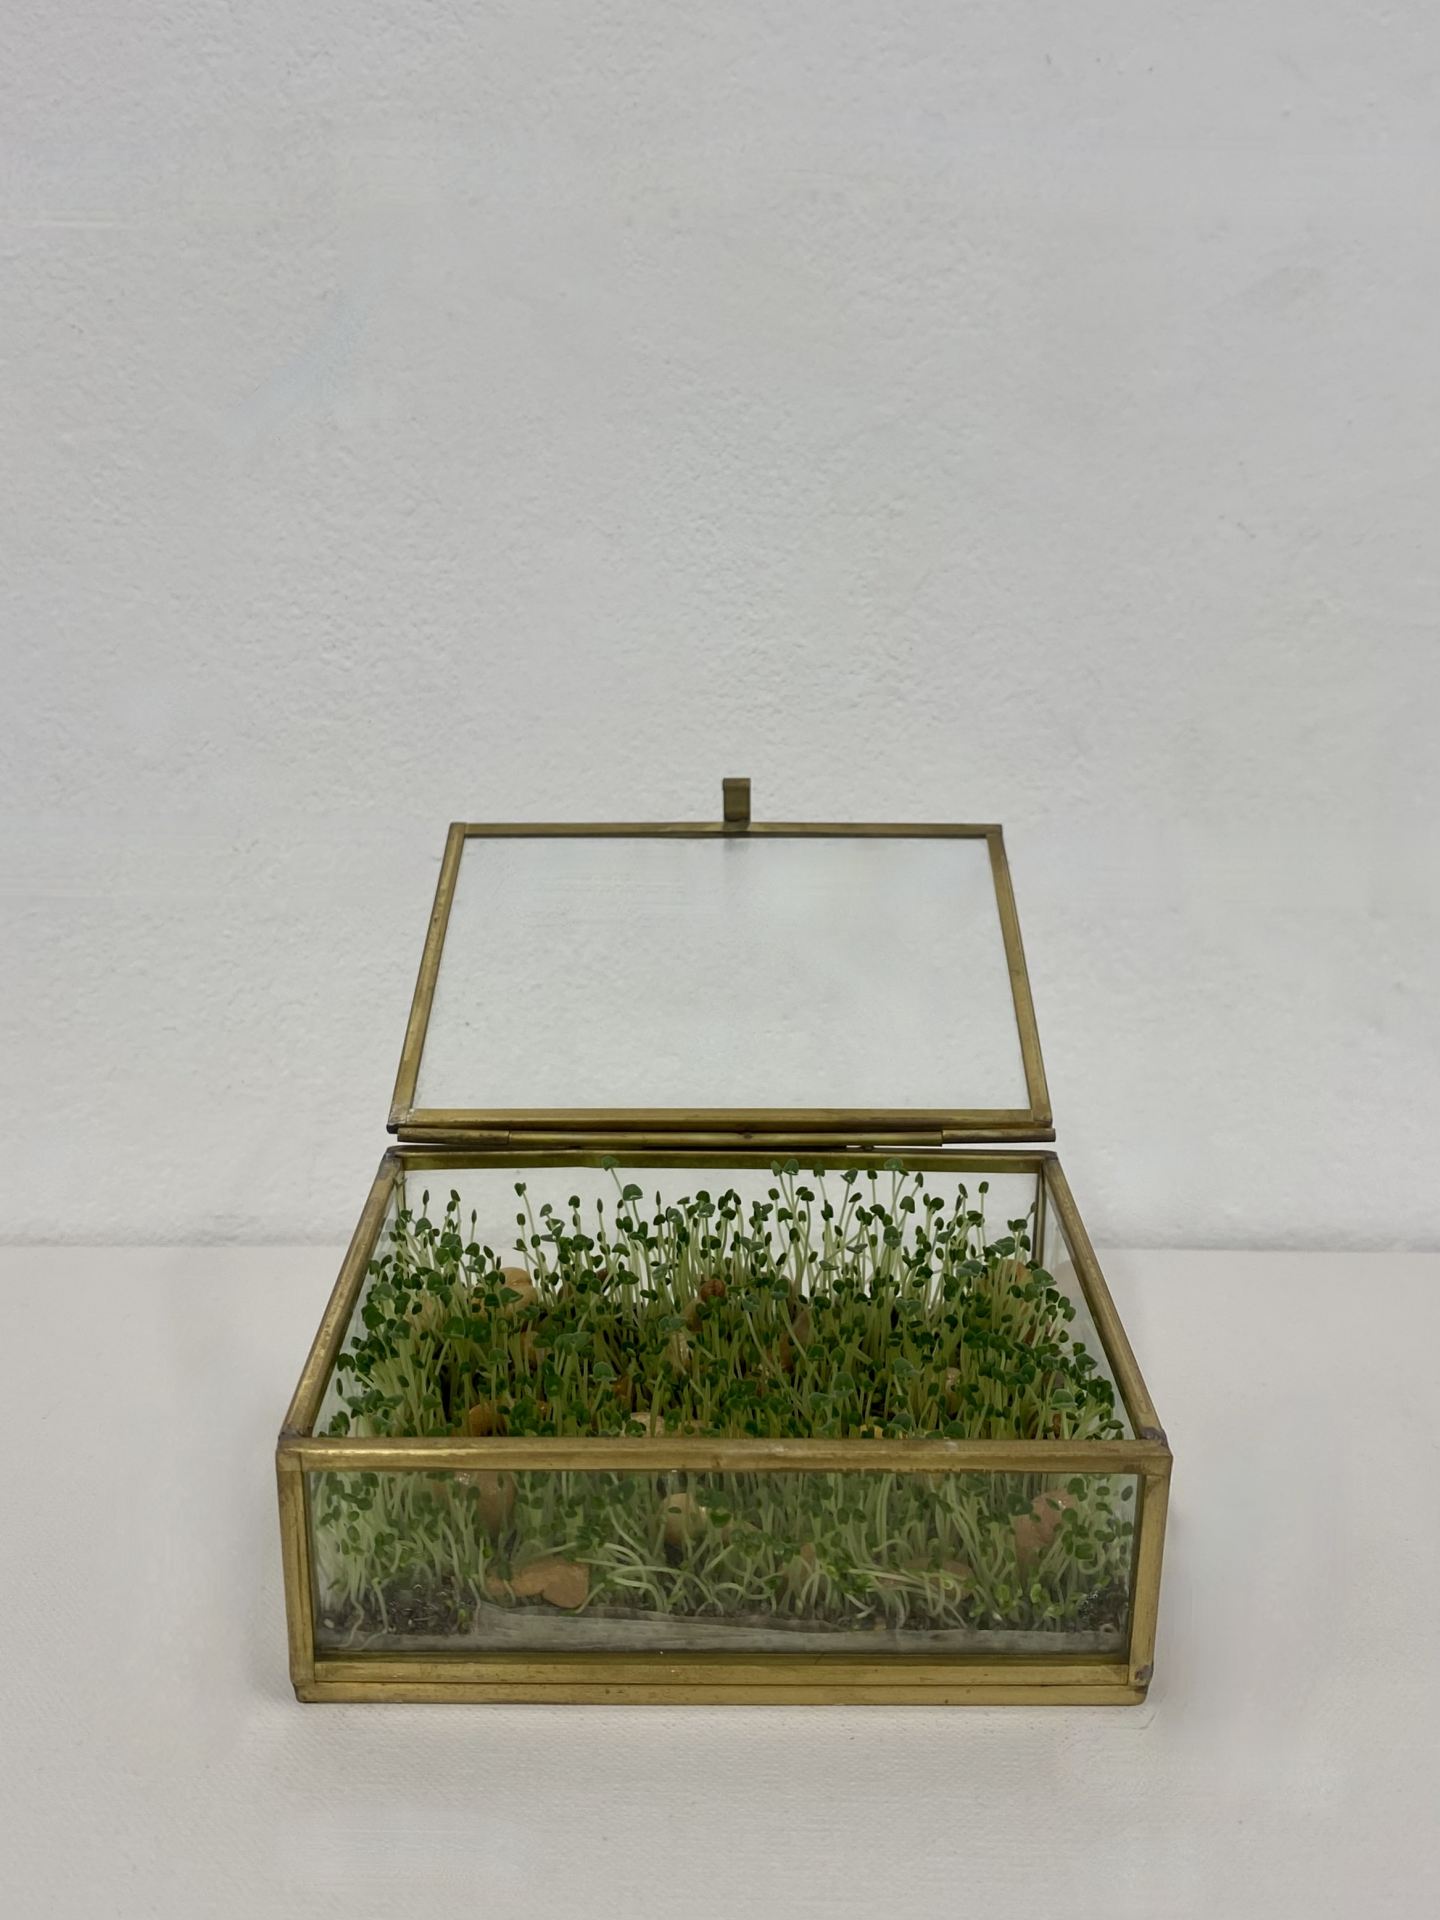 An image of a glass box filled with chia sprouts and clay figurines, set against a white background.